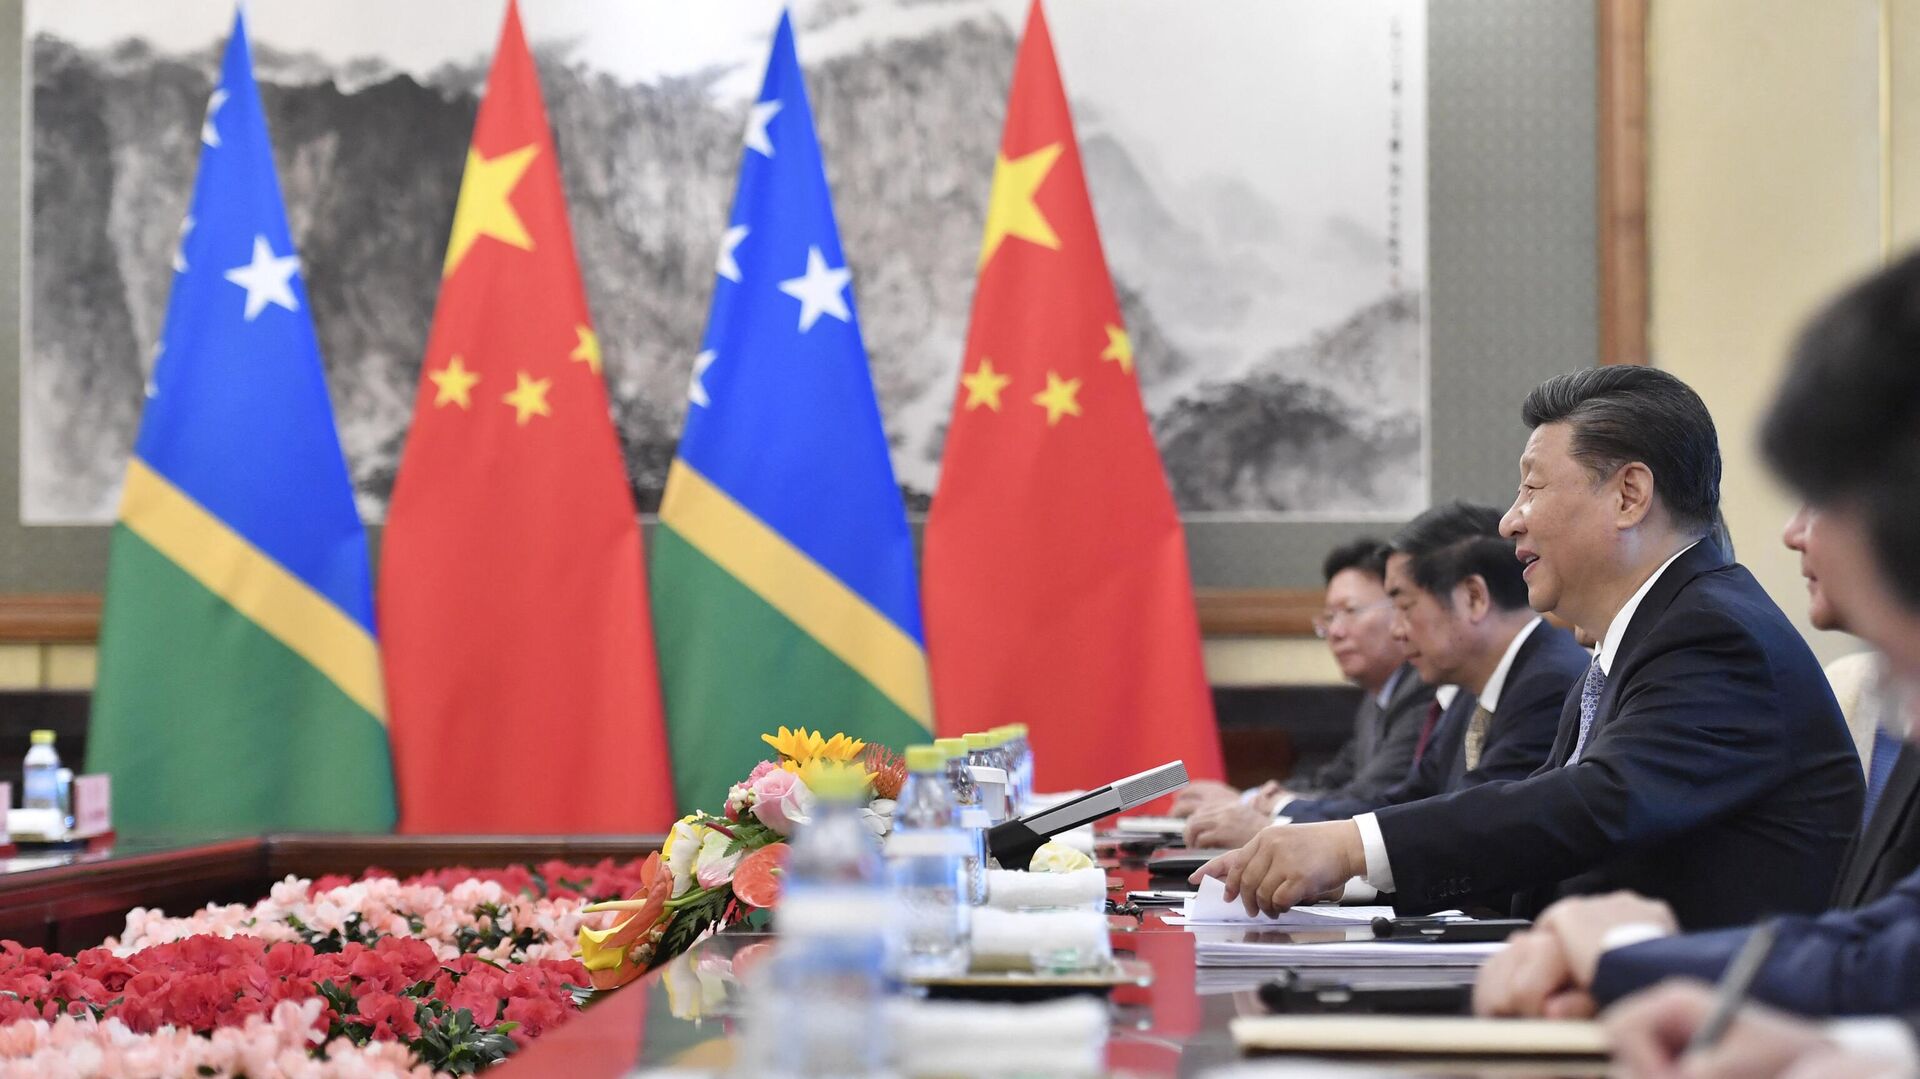 Chinese President Xi Jinping talks to Solomon Islands Prime Minister Manasseh Sogavare (not pictured) during their meeting at the Diaoyutai State Guesthouse in Beijing on October 9, 2019. (Photo by Parker Song / POOL / AFP) - Sputnik International, 1920, 28.03.2022